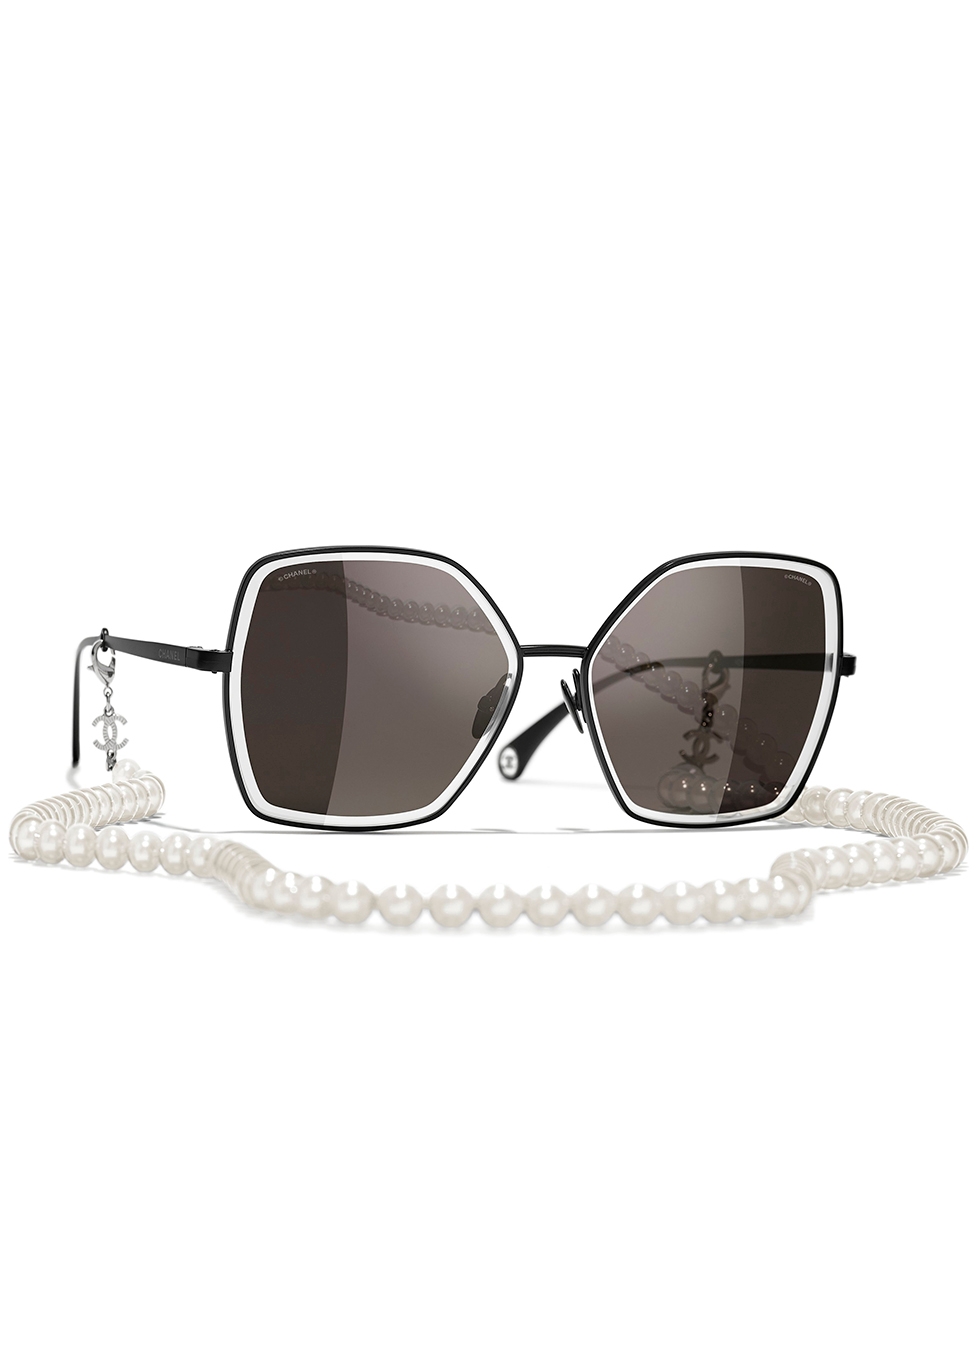 How MustHave Are Those Swanky Sunglasses Really  Blog Of The Nation   NPR